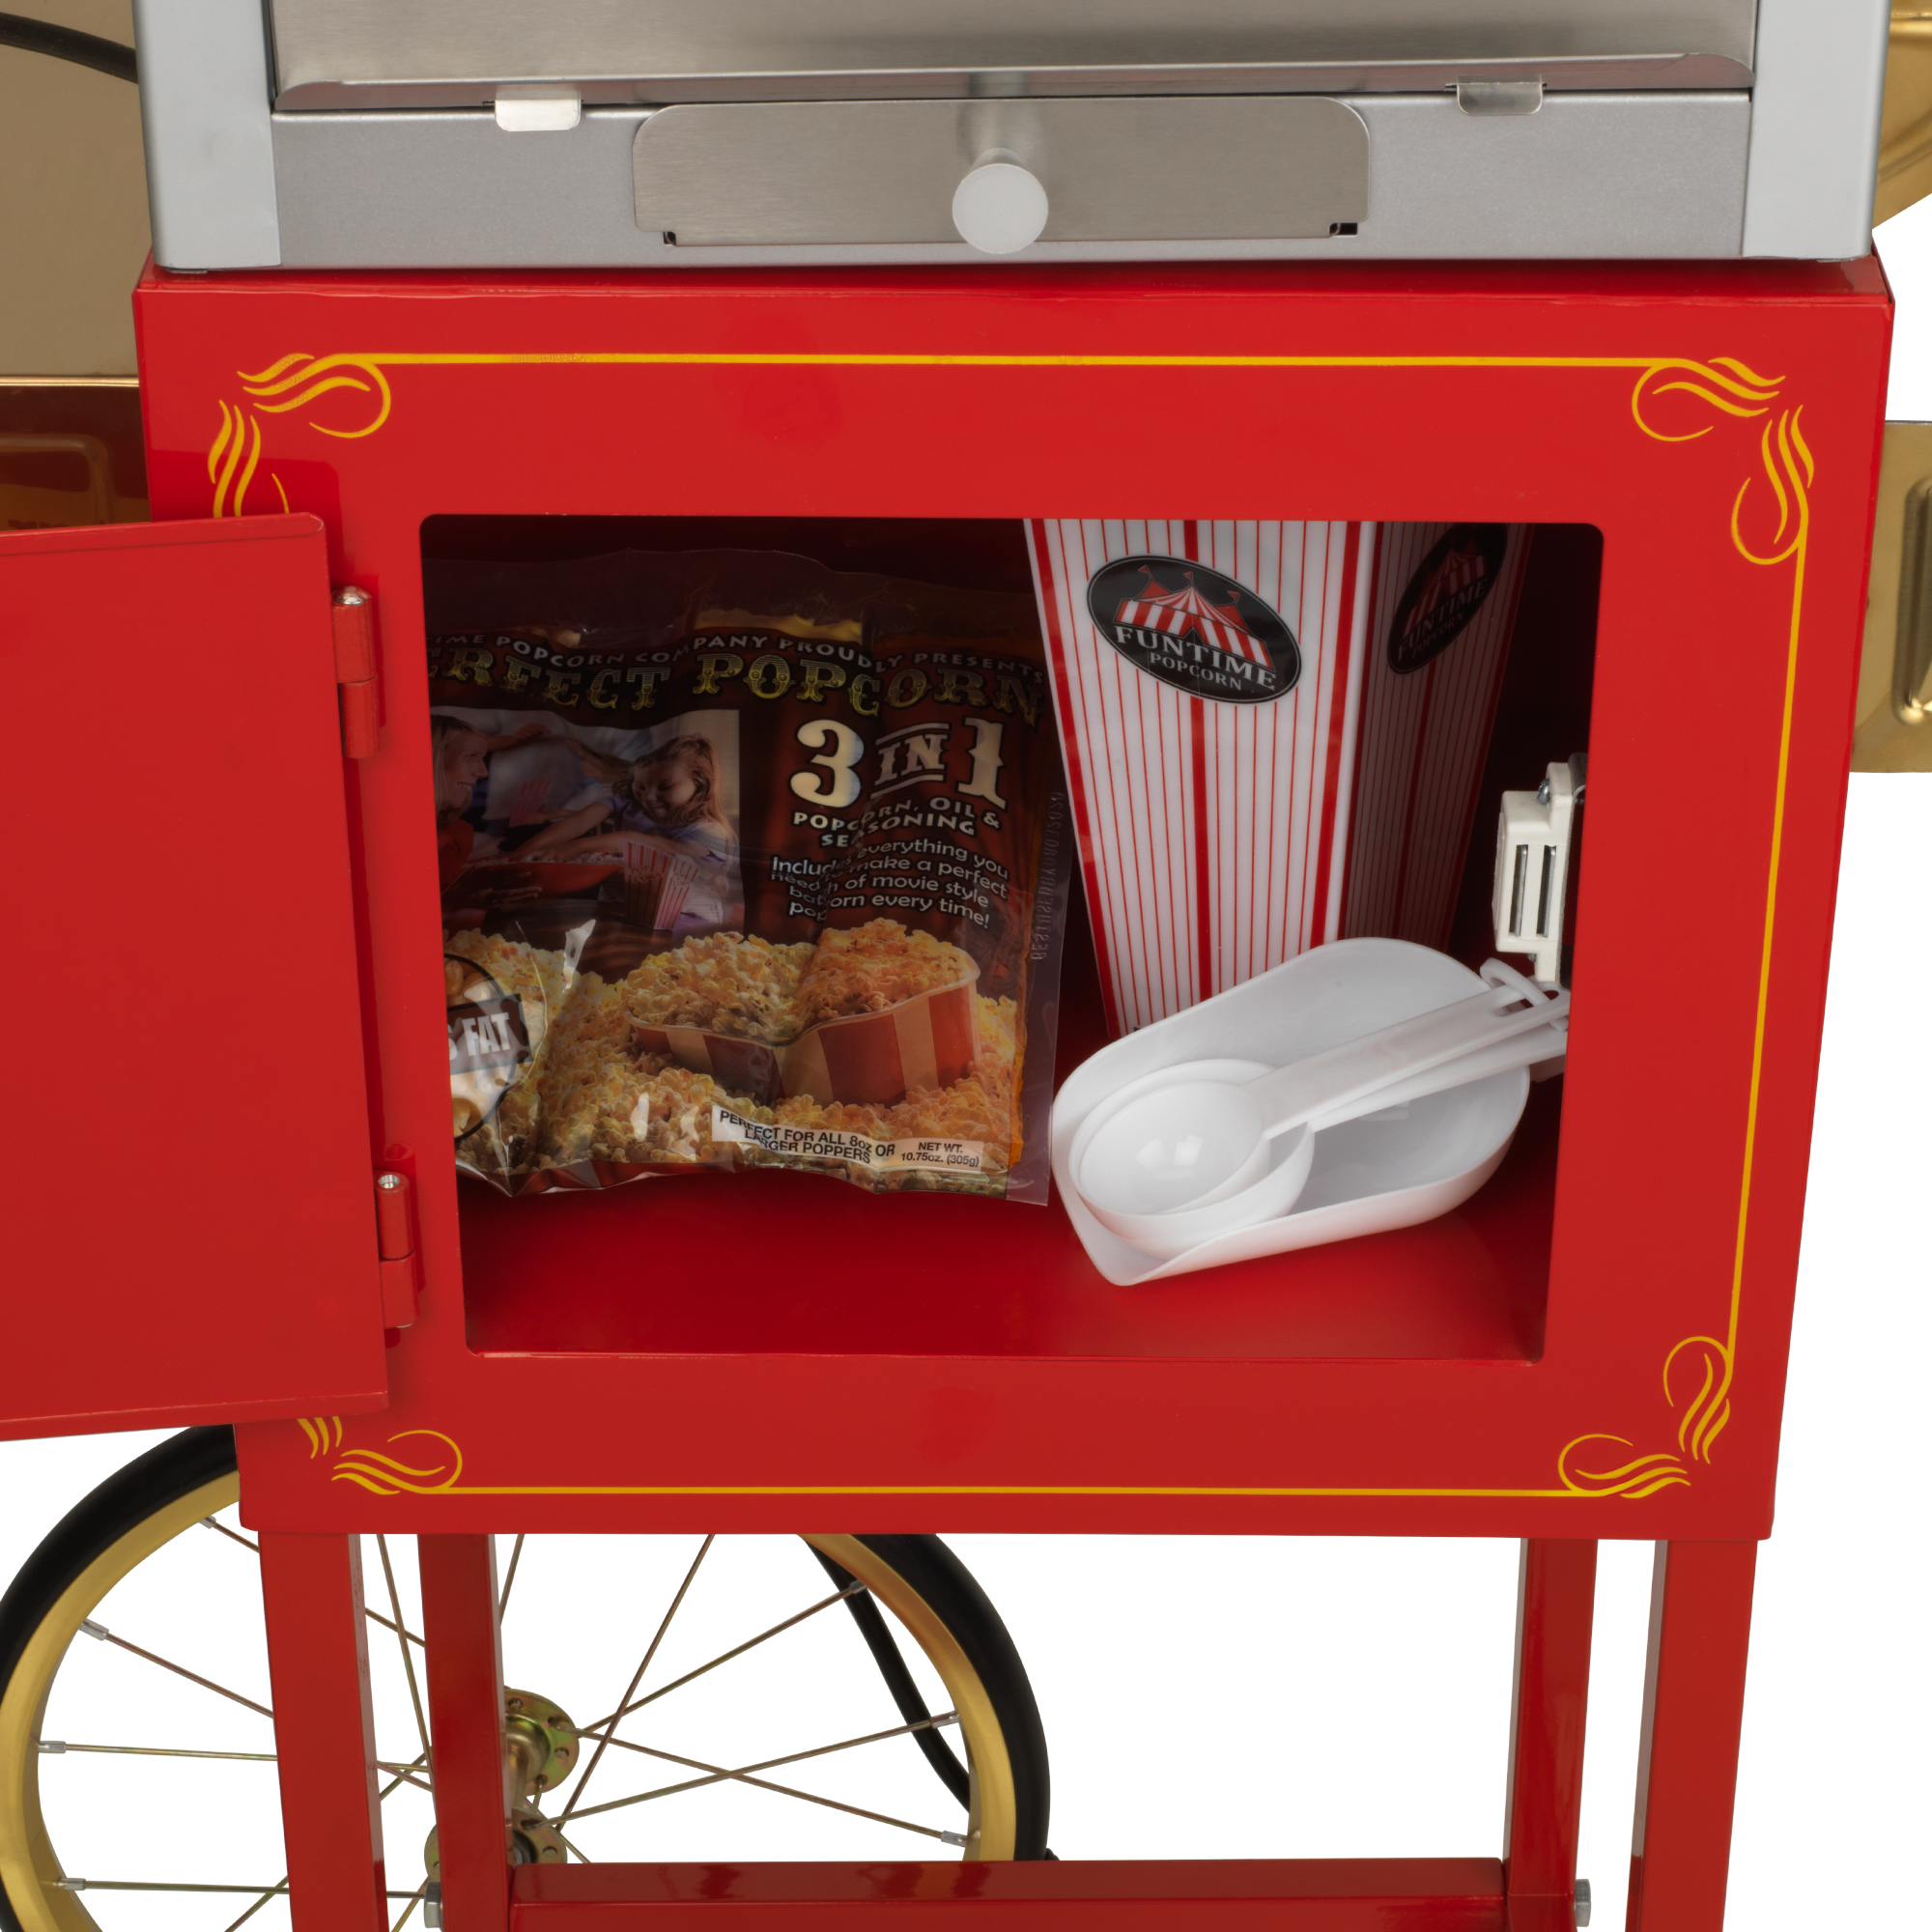 Funtime Sideshow Popper 4-oz Hot Oil Popcorn Machine with Red/ Gold Cart